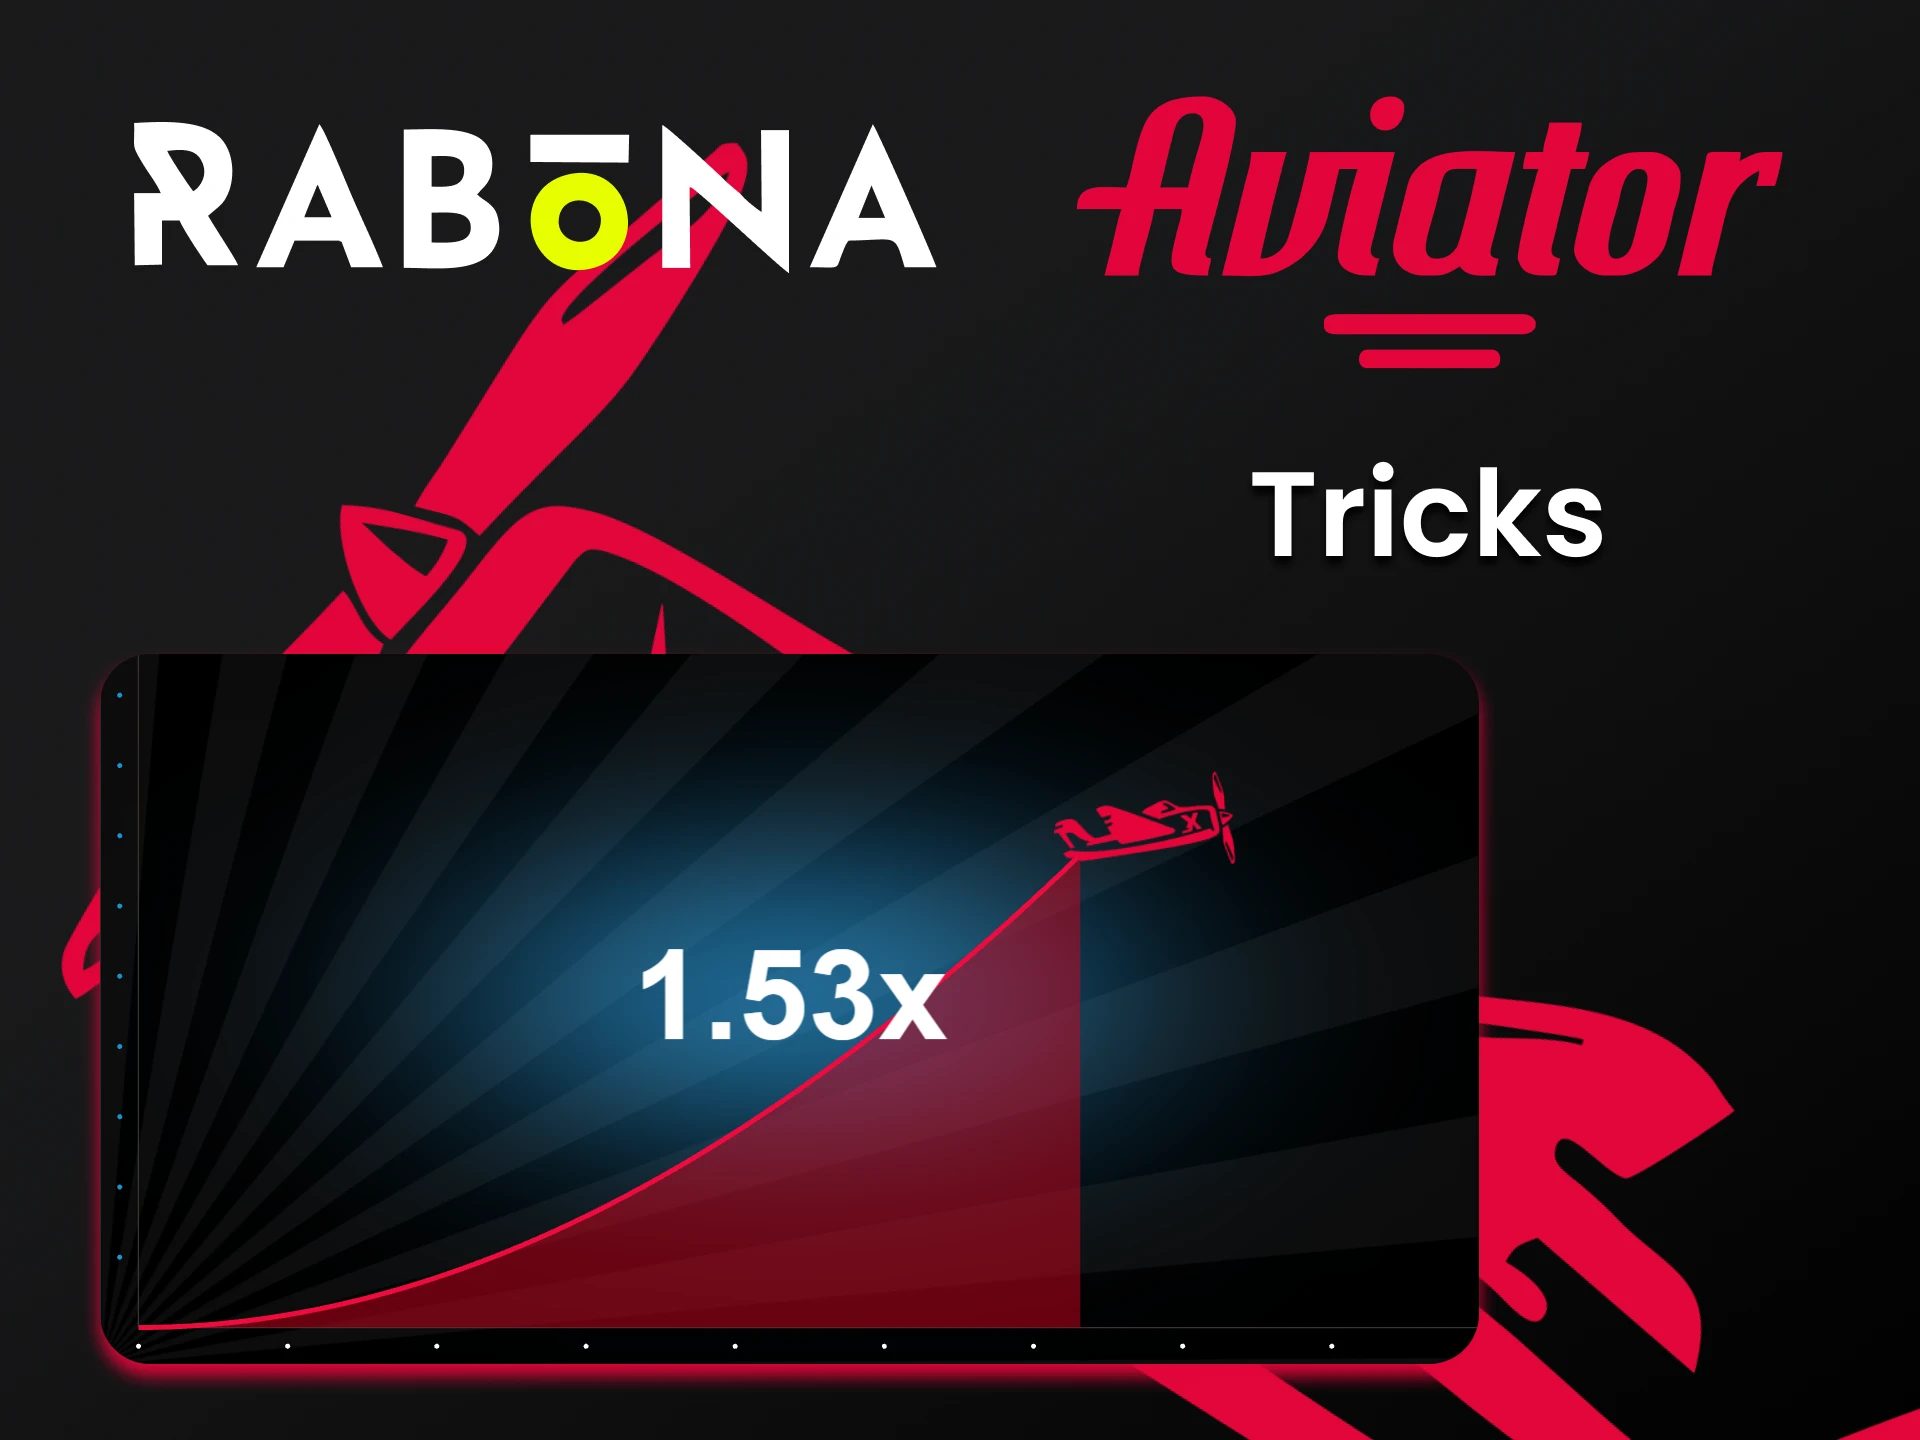 Find out how you can win Aivator on Rabona.